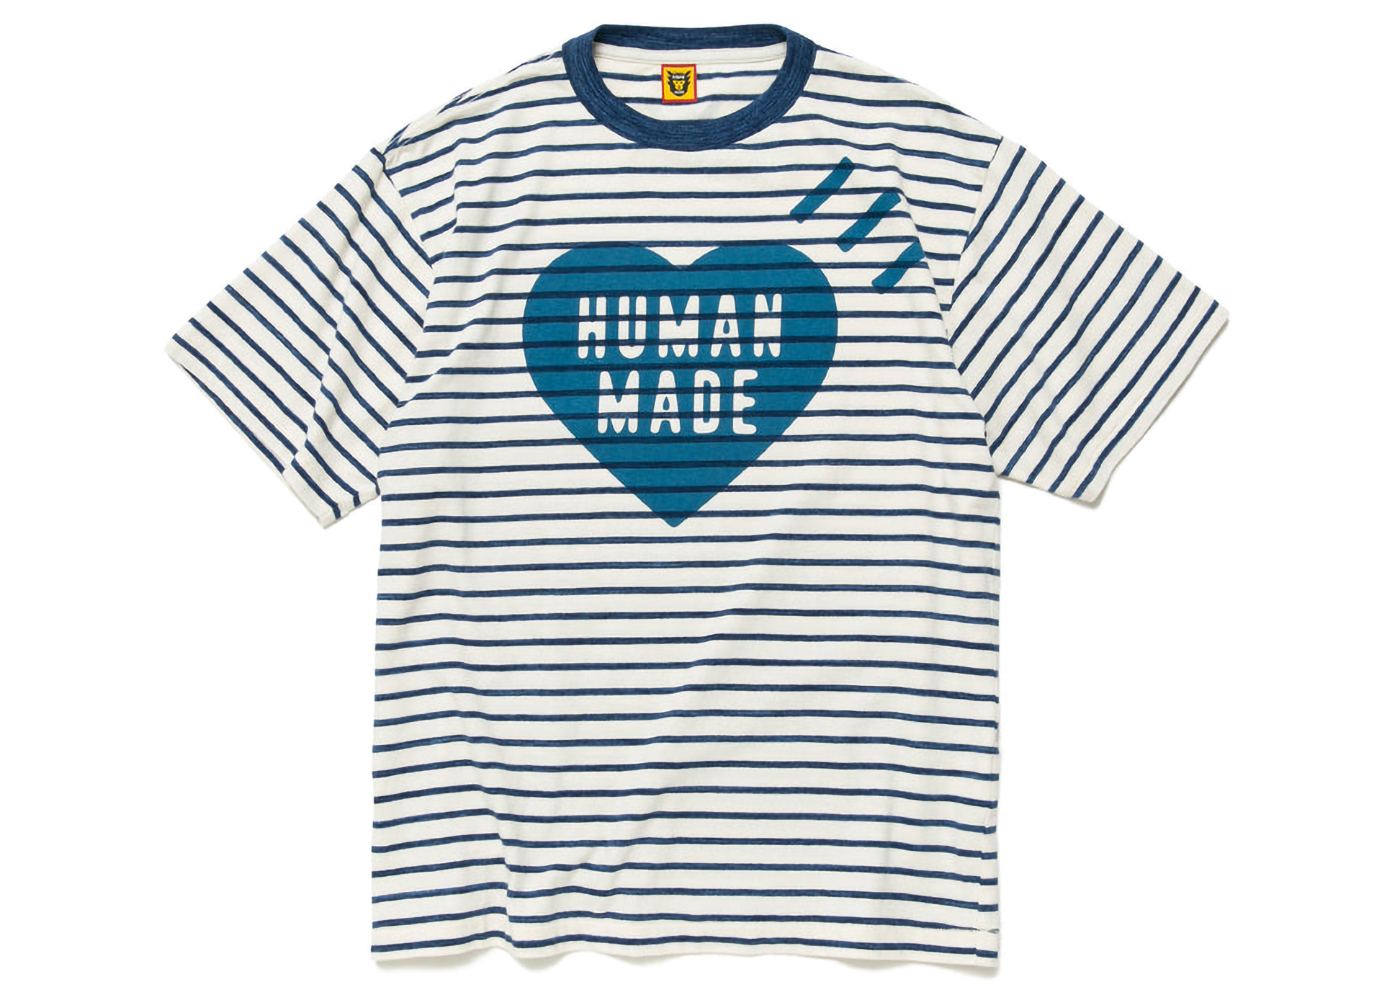 human made tシャツ